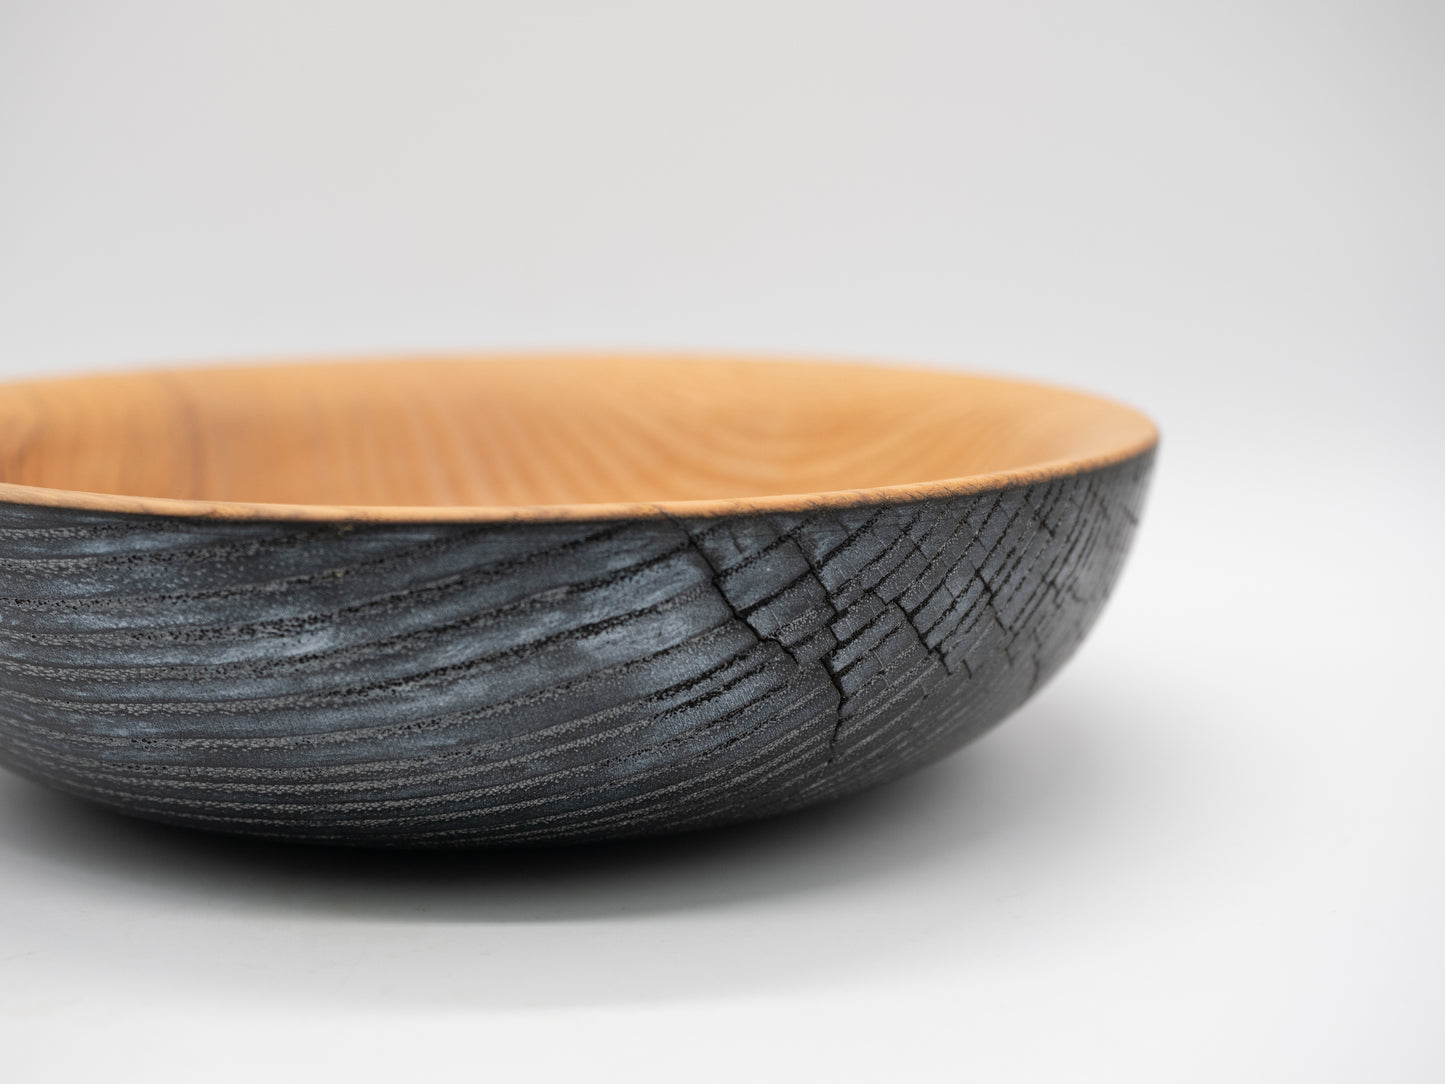 Beautiful Wooden ASH Dish Coloured / Textured - Handmade, Wood Turned and Very Unique